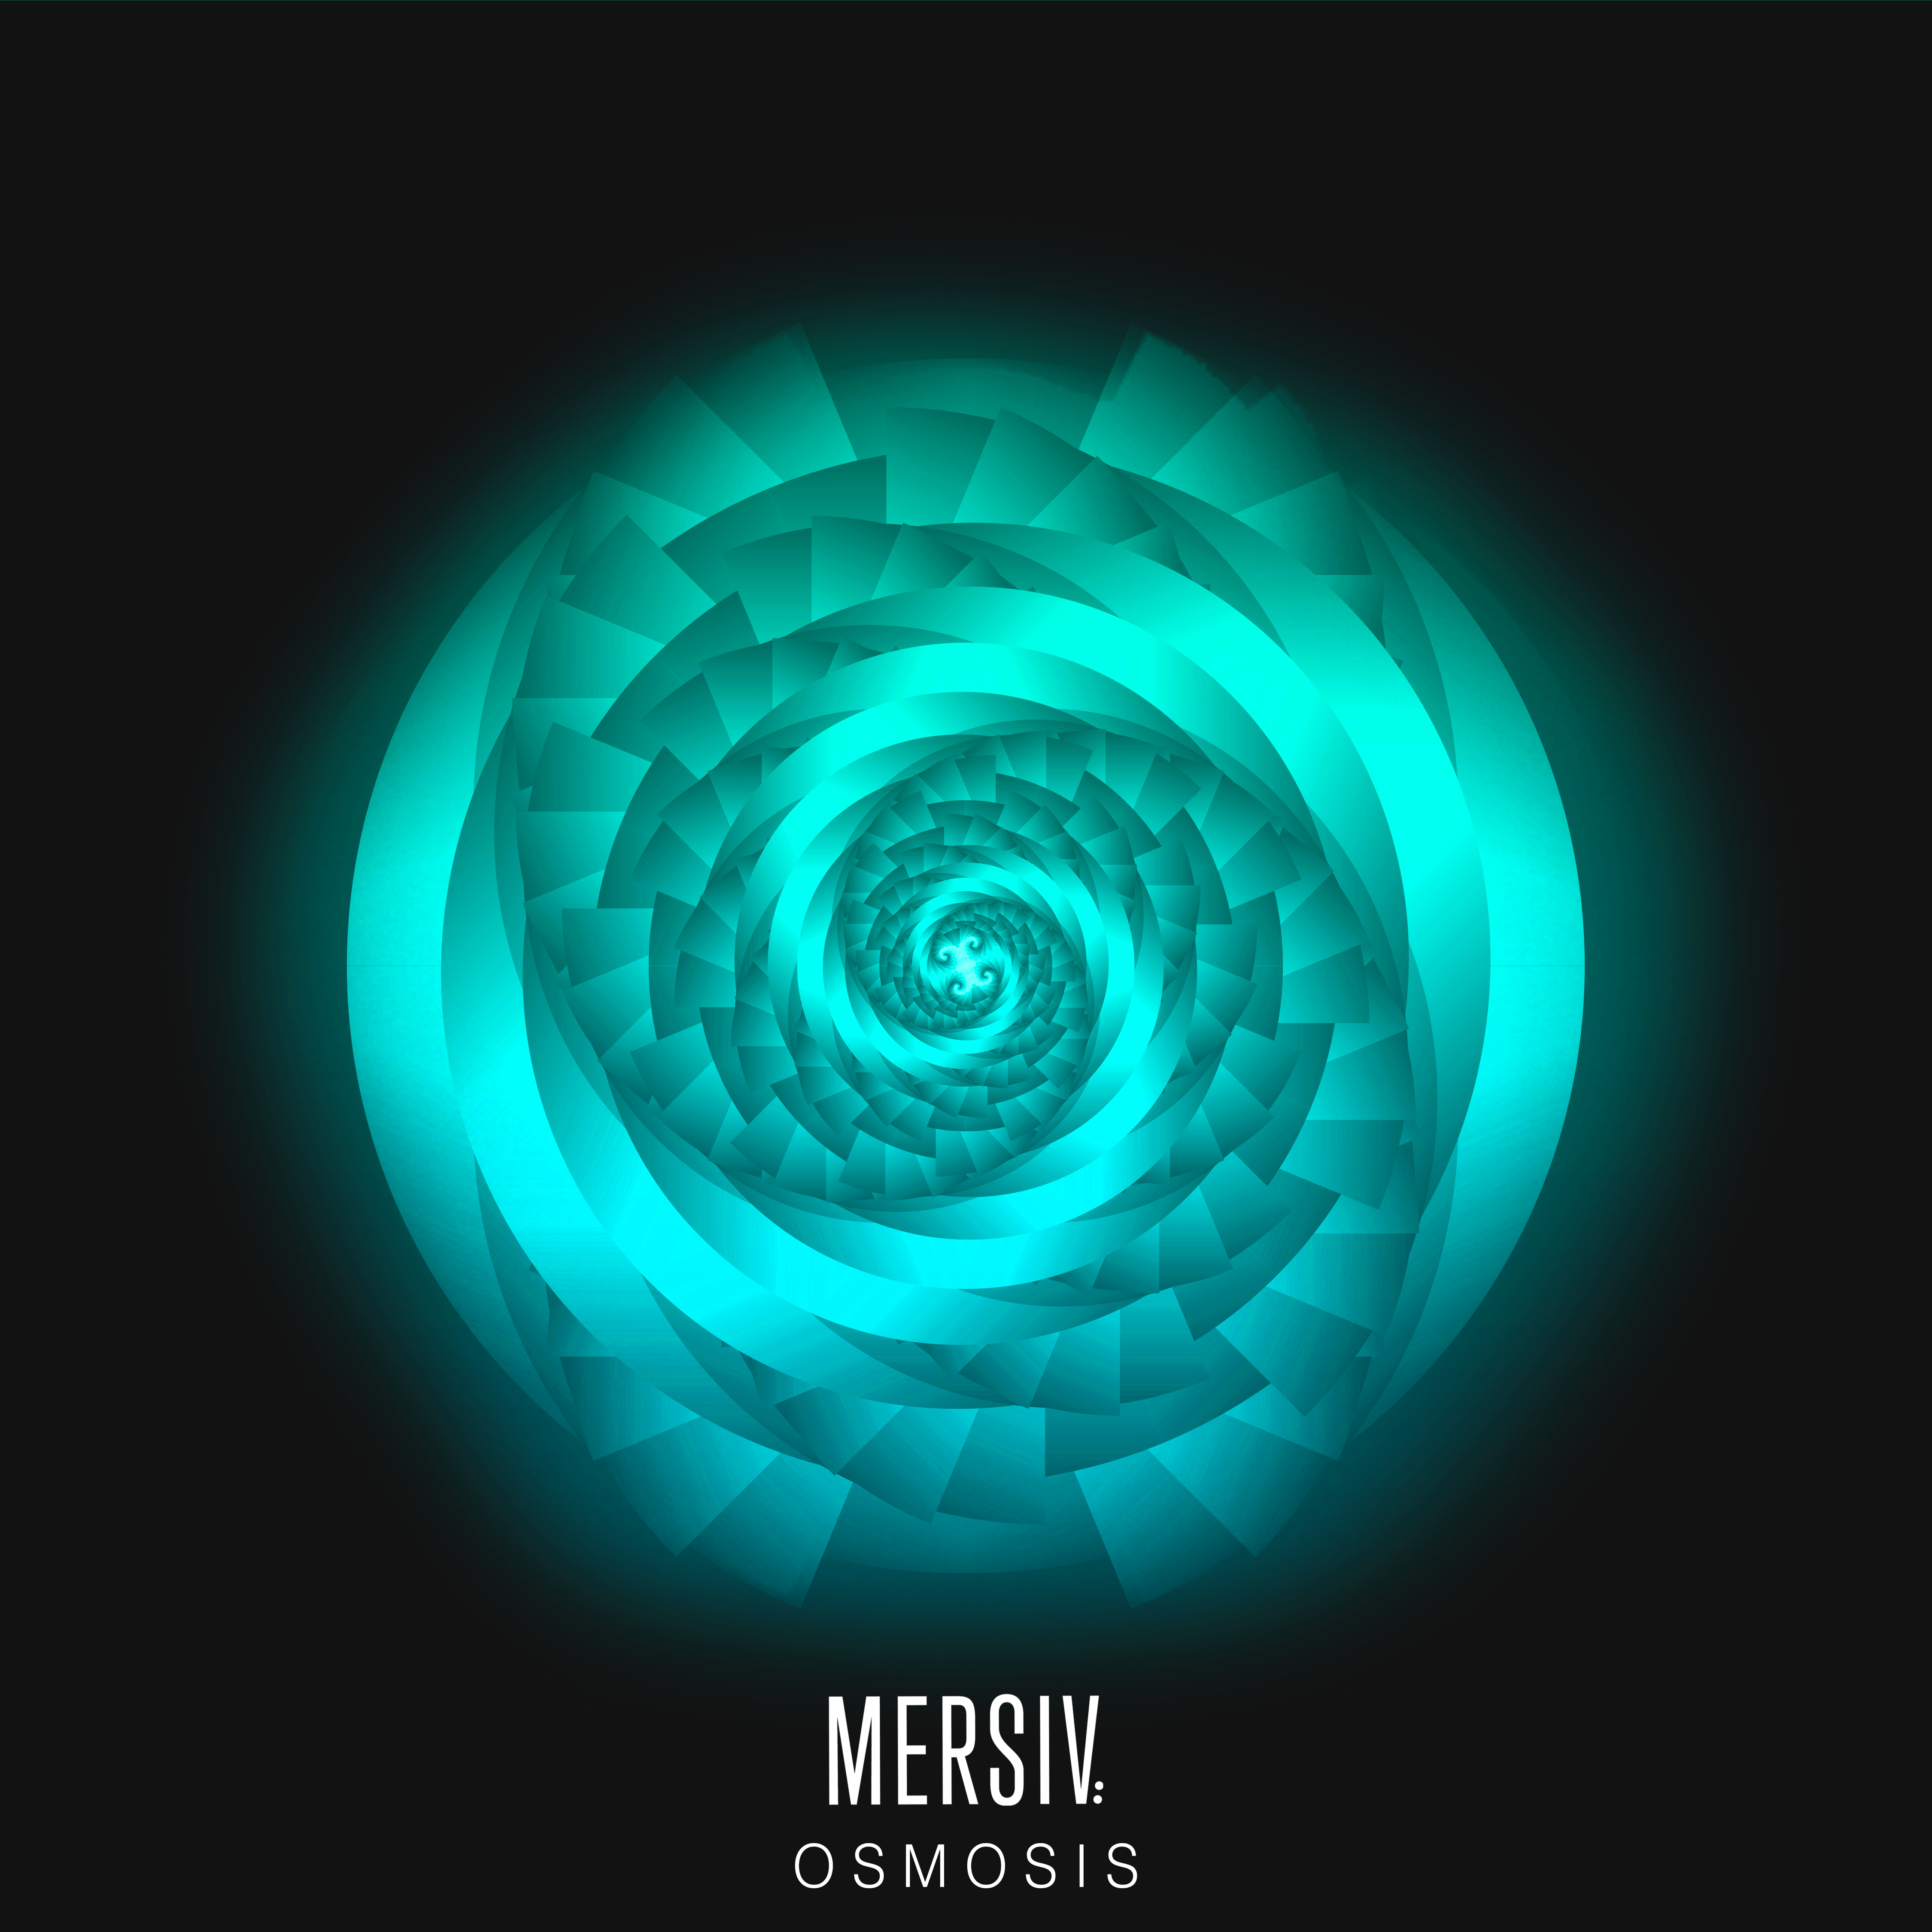 Mersiv Changes The Pace With New Downtempo Single ‘Osmosis’